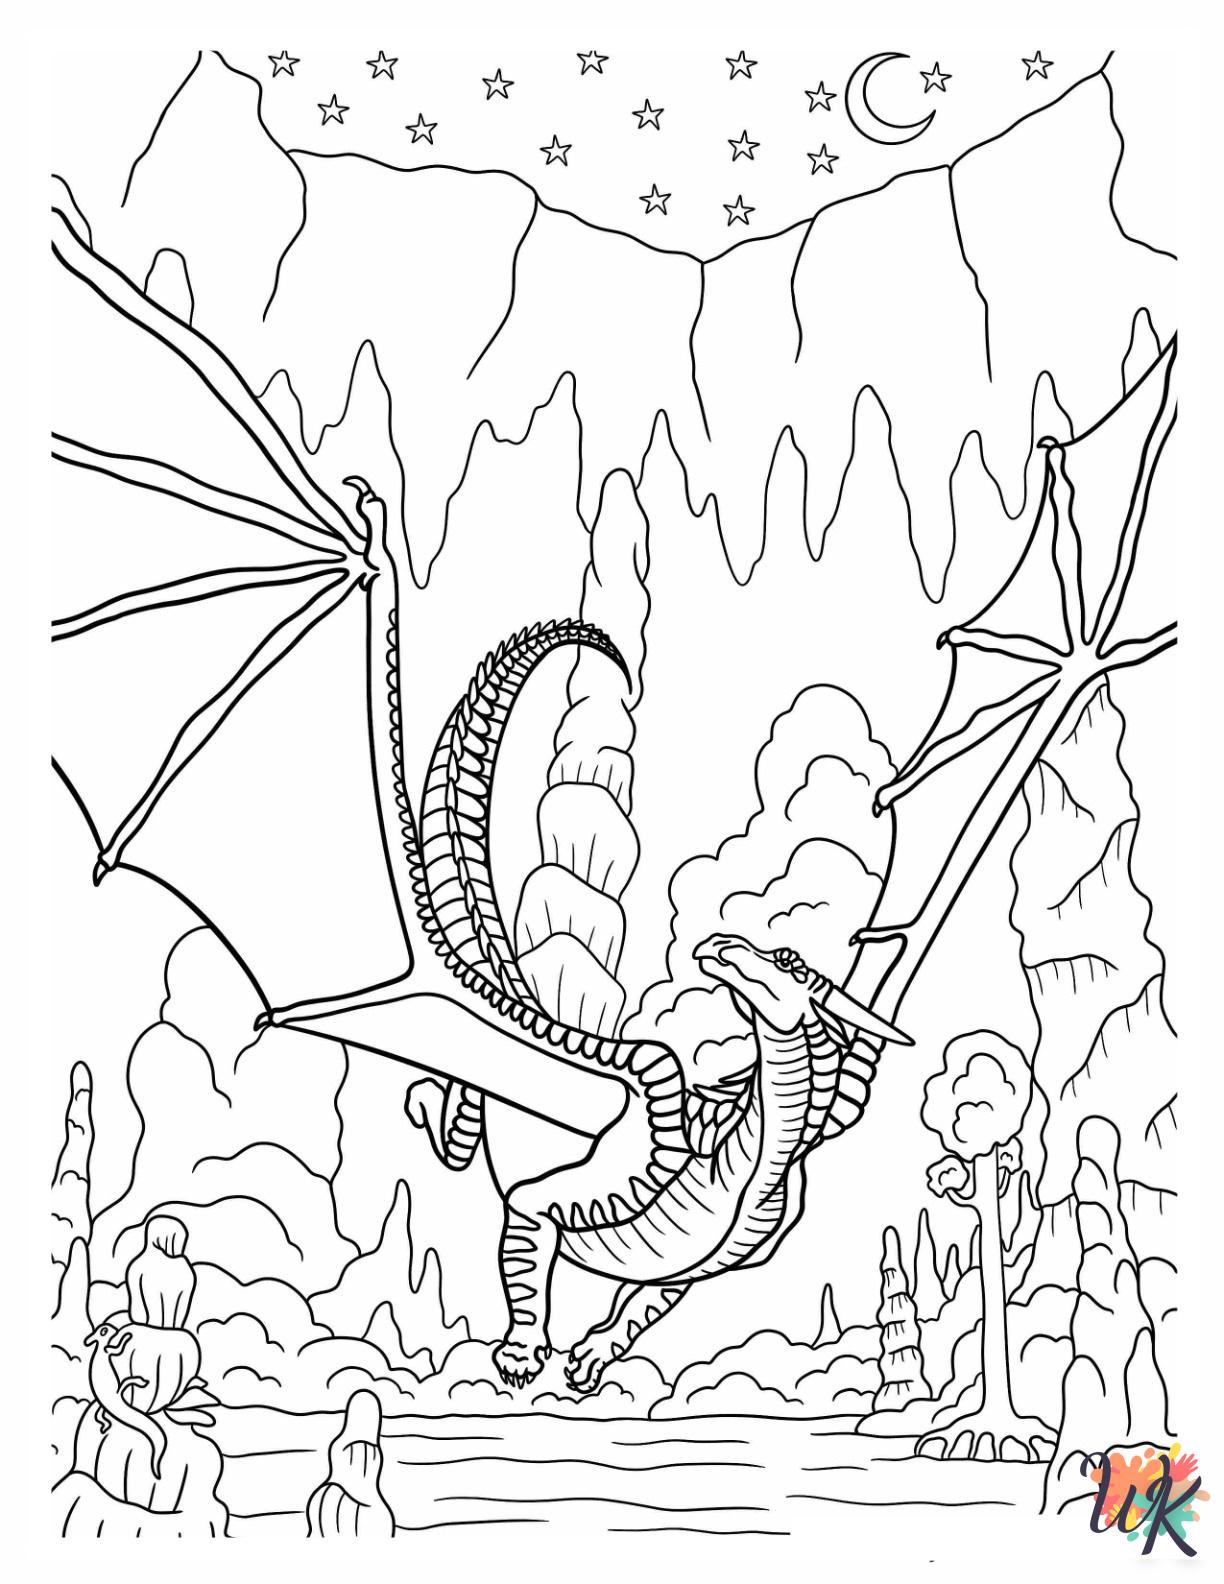 Wings Of Fire coloring pages for adults easy 1